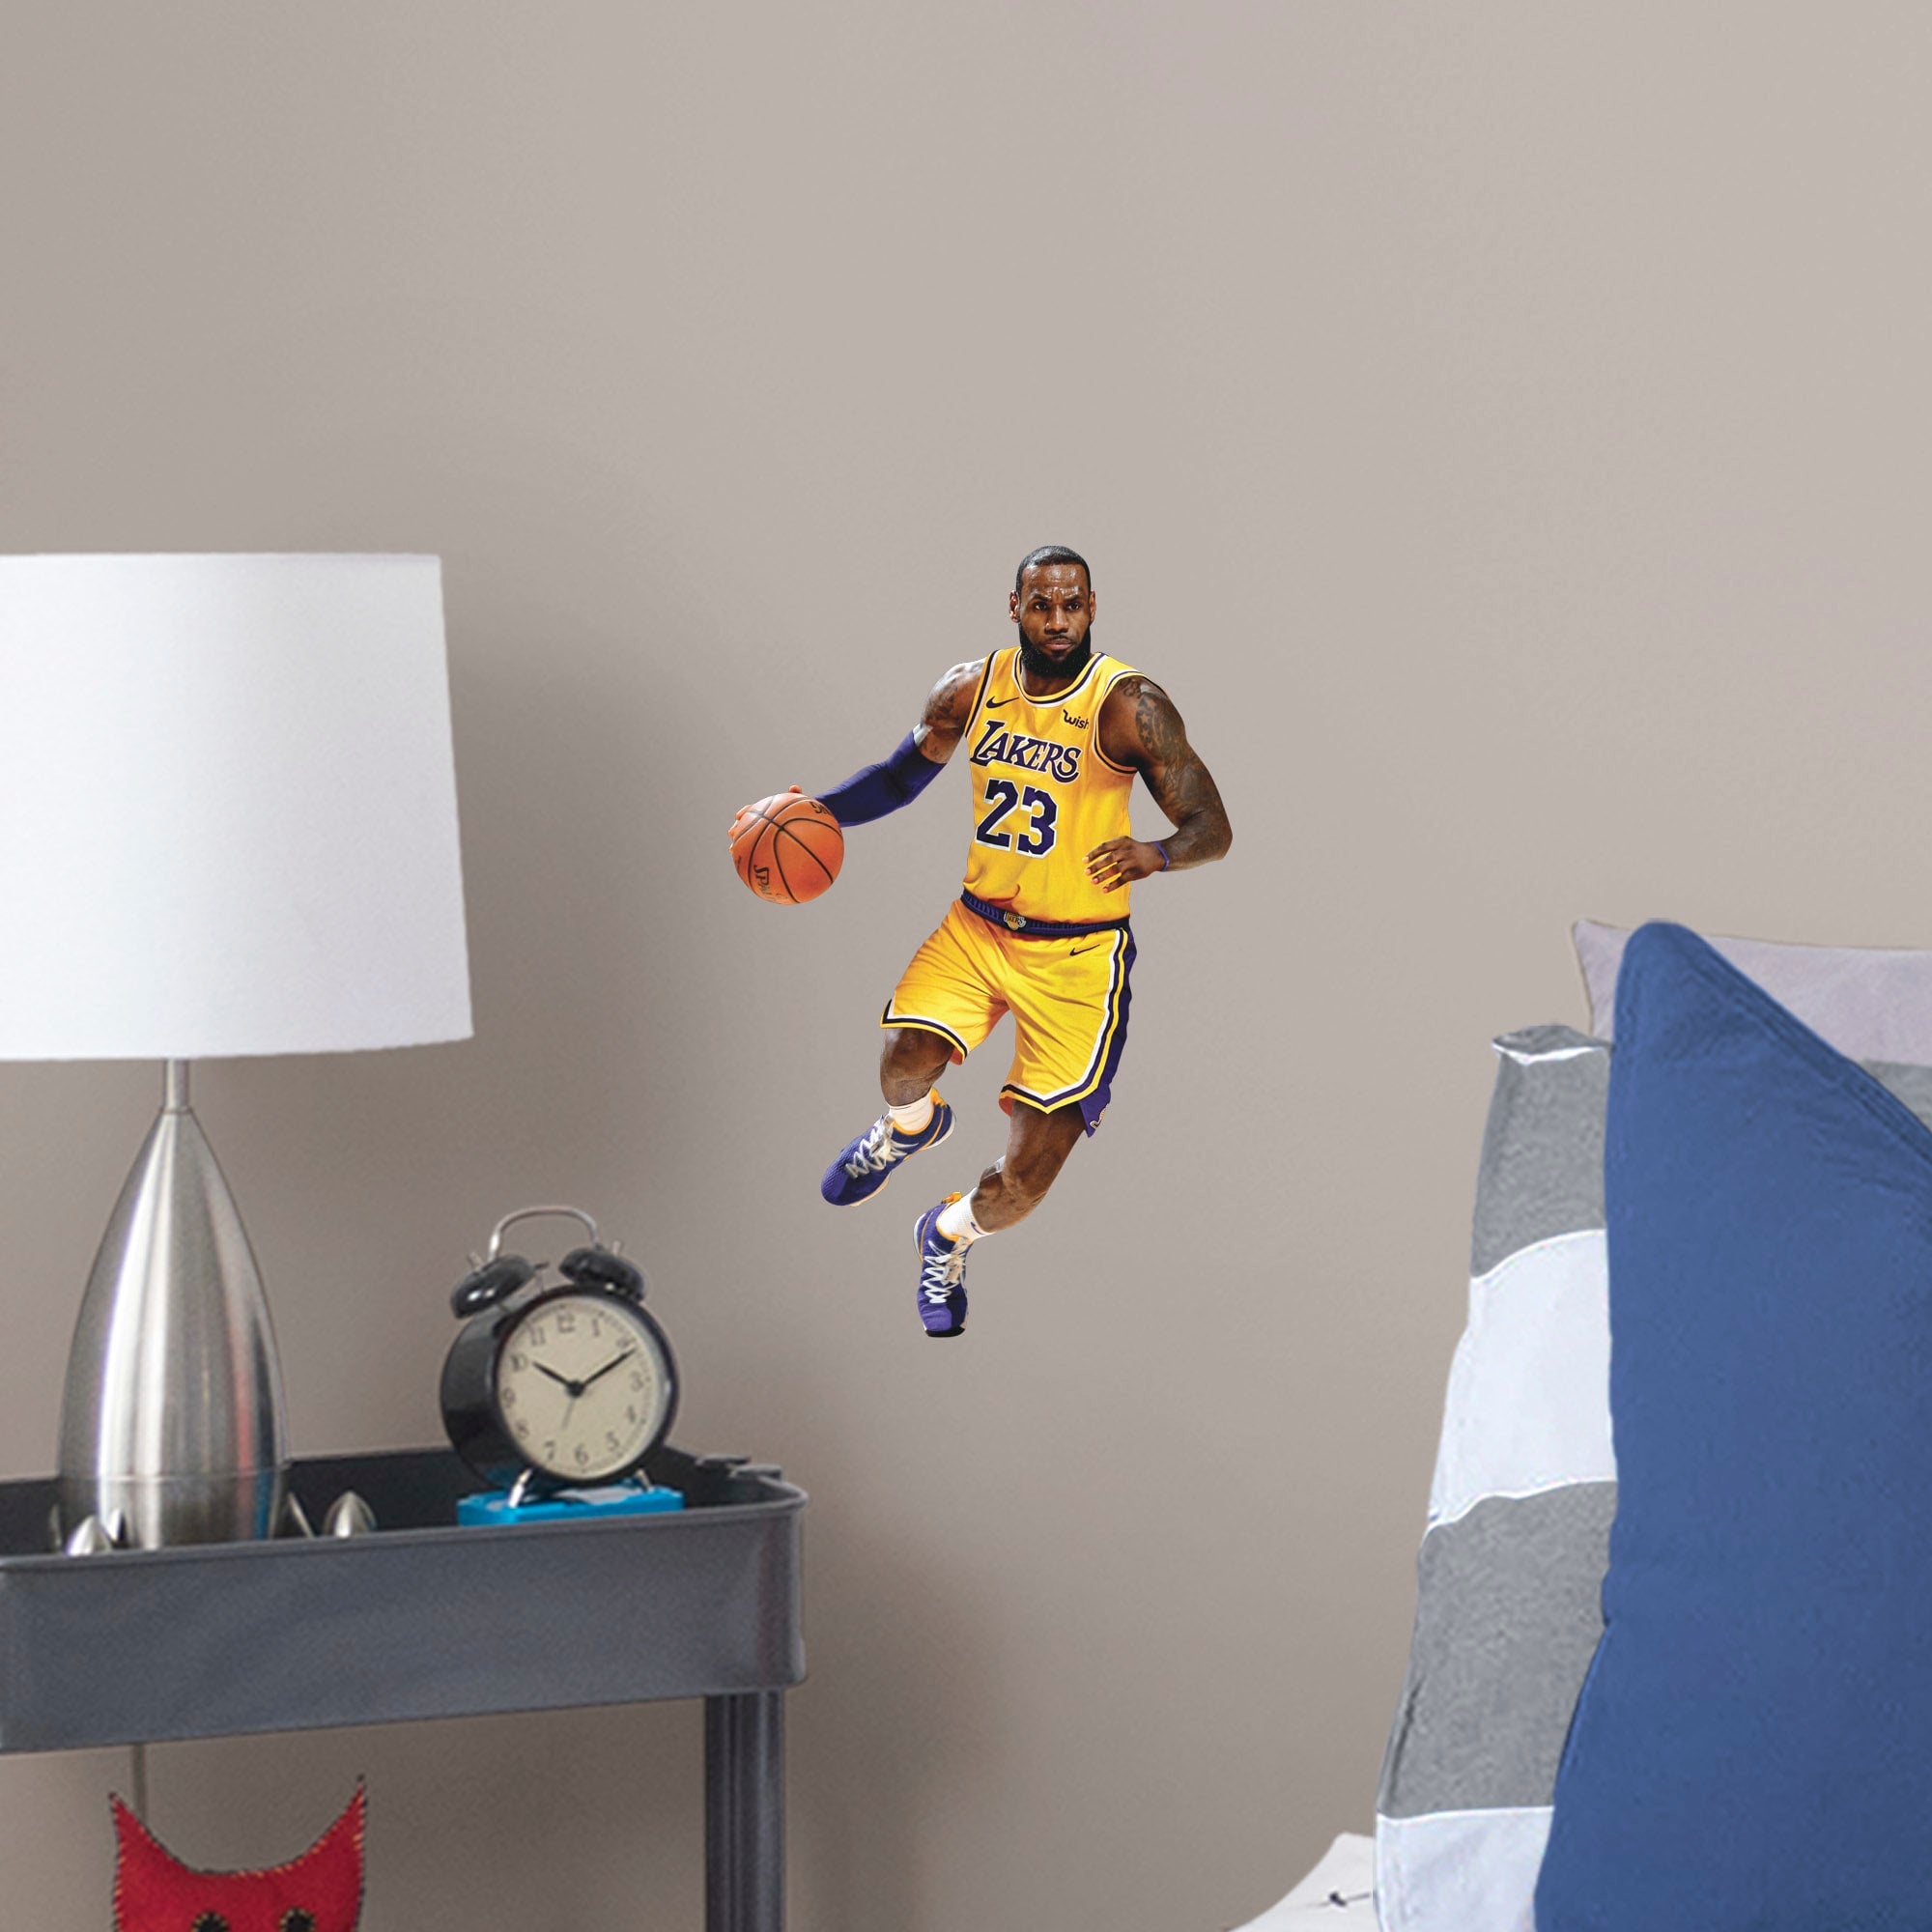 LeBron James for Los Angeles Lakers - Officially Licensed NBA Removable Wall Decal Large by Fathead | Vinyl